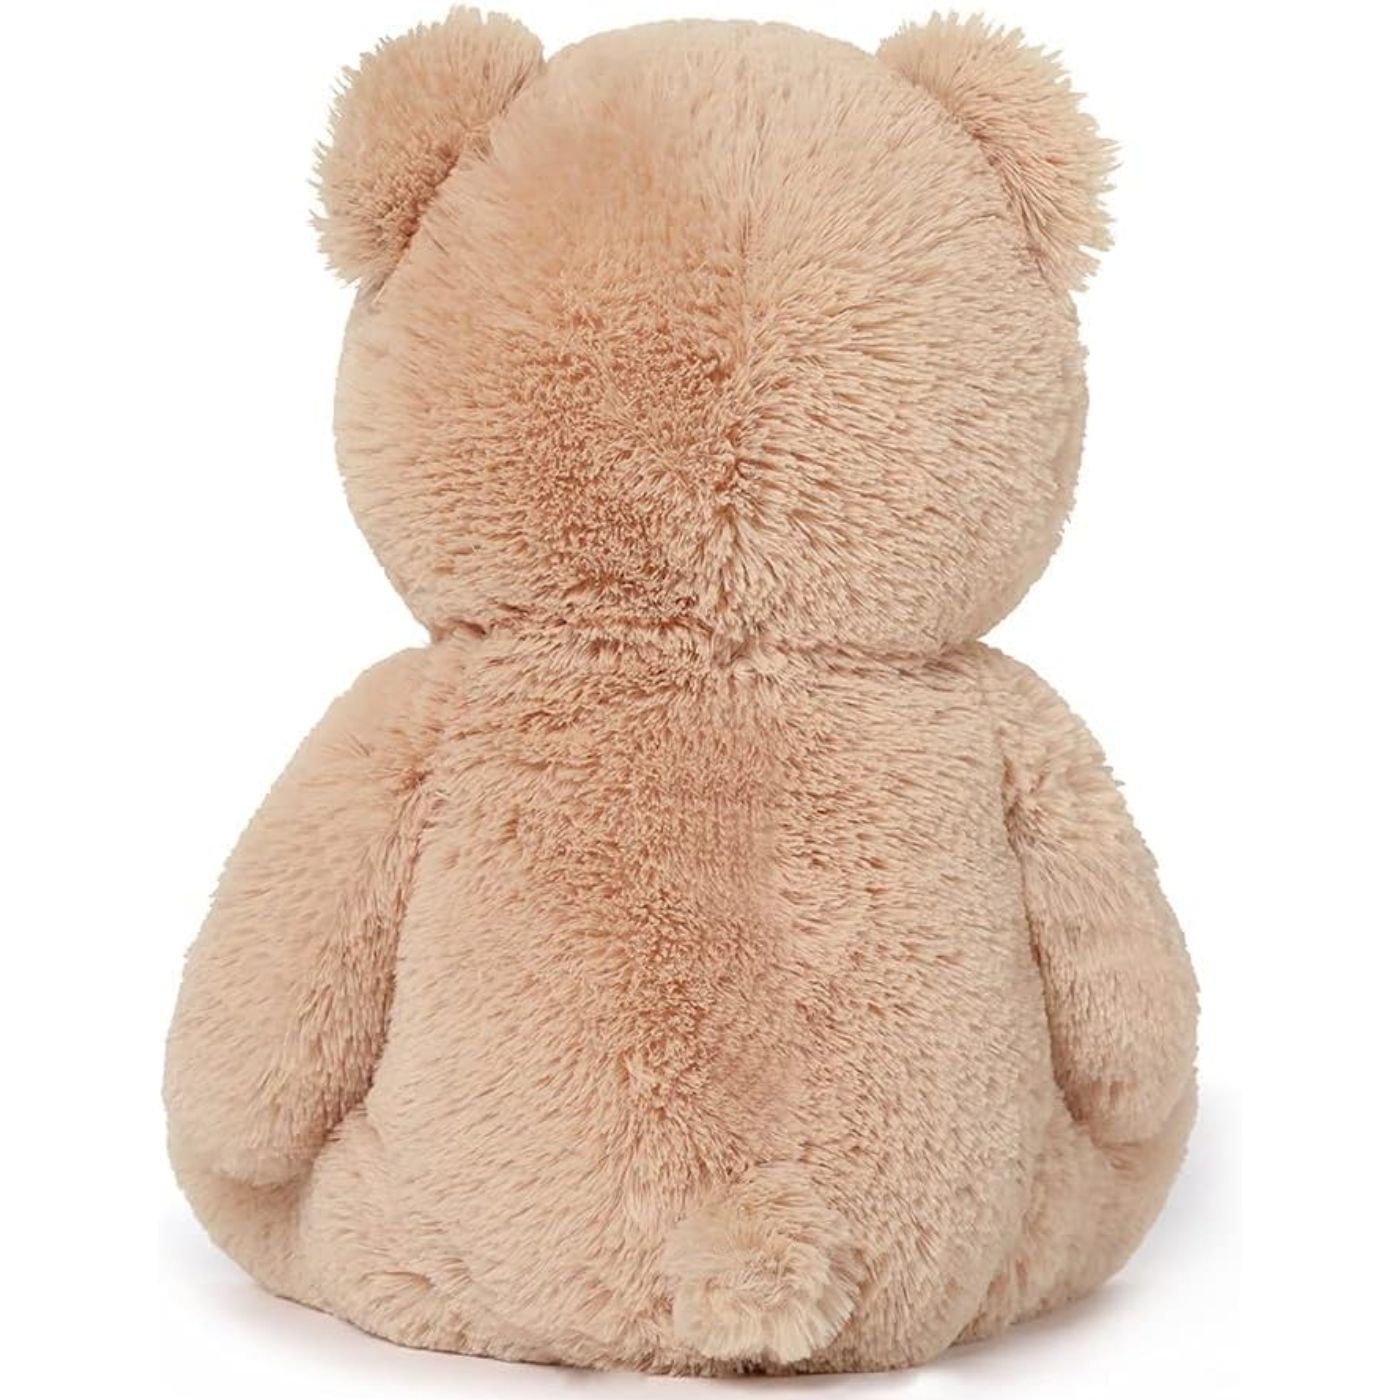 Teddy Bear Stuffed Toy, Light Brown/White, 18 Inches